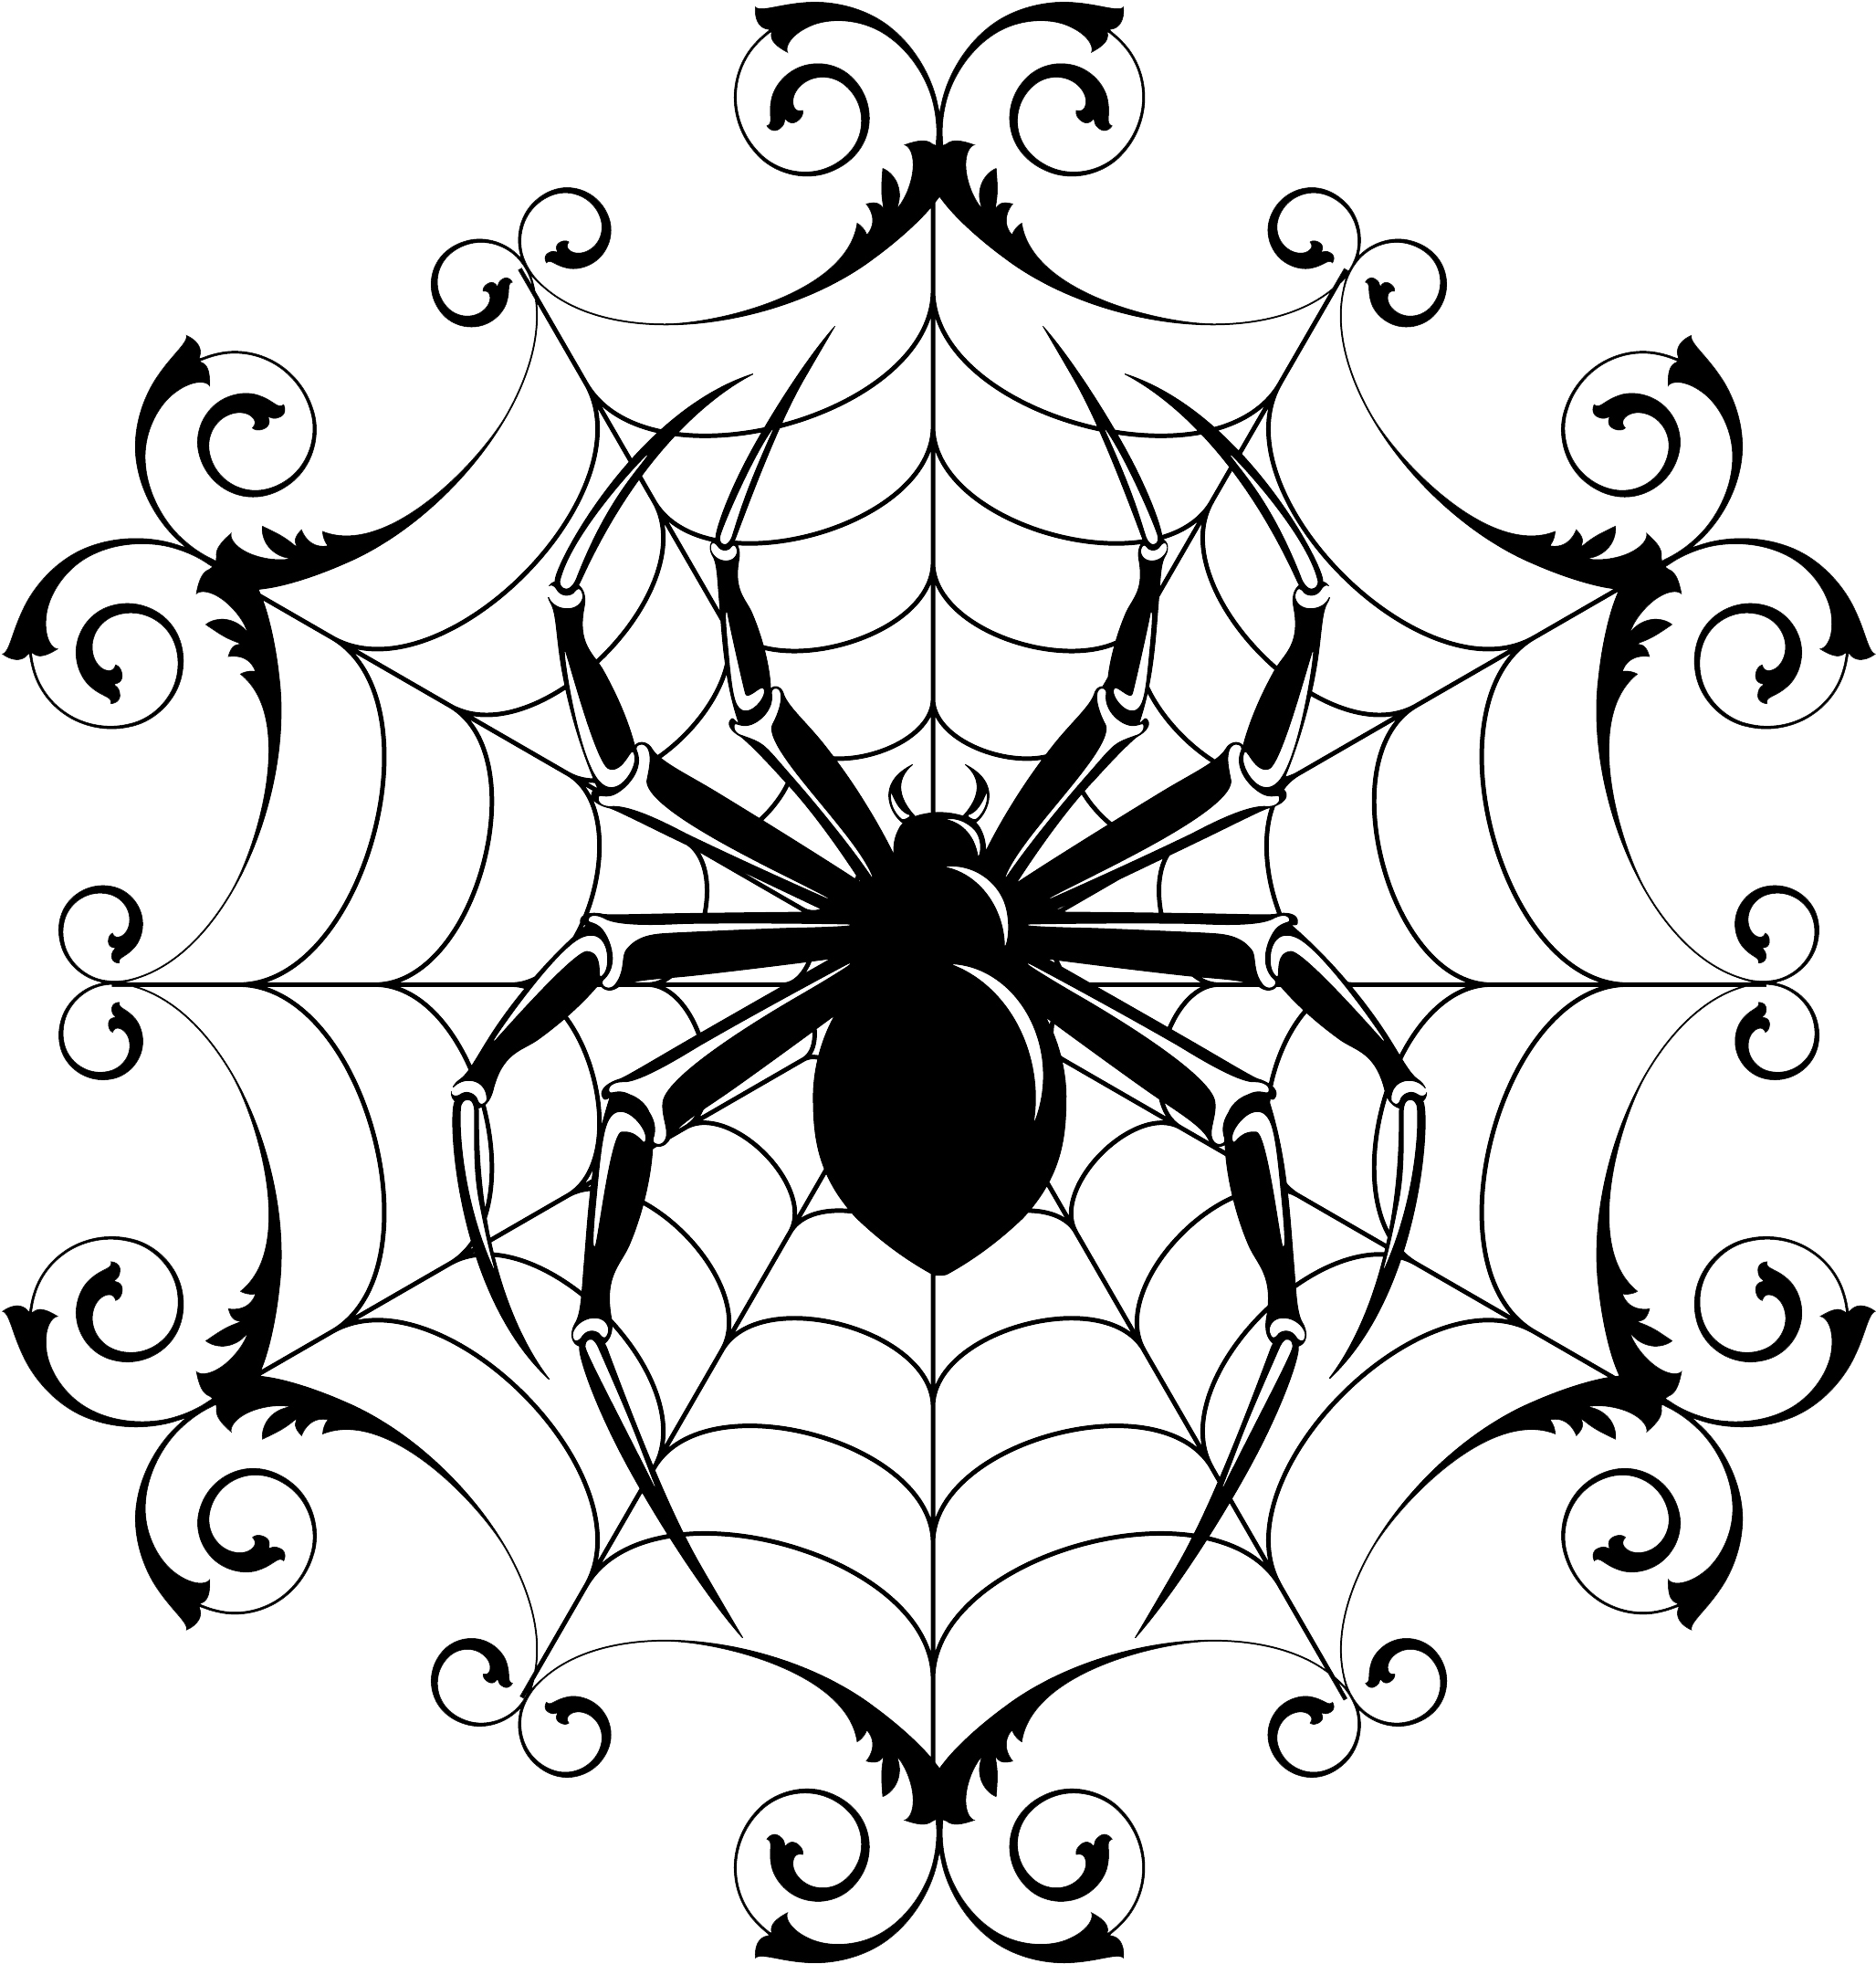 Spider And Spider Web Image - Halloween Drawings Of Spiders (2164x2268)